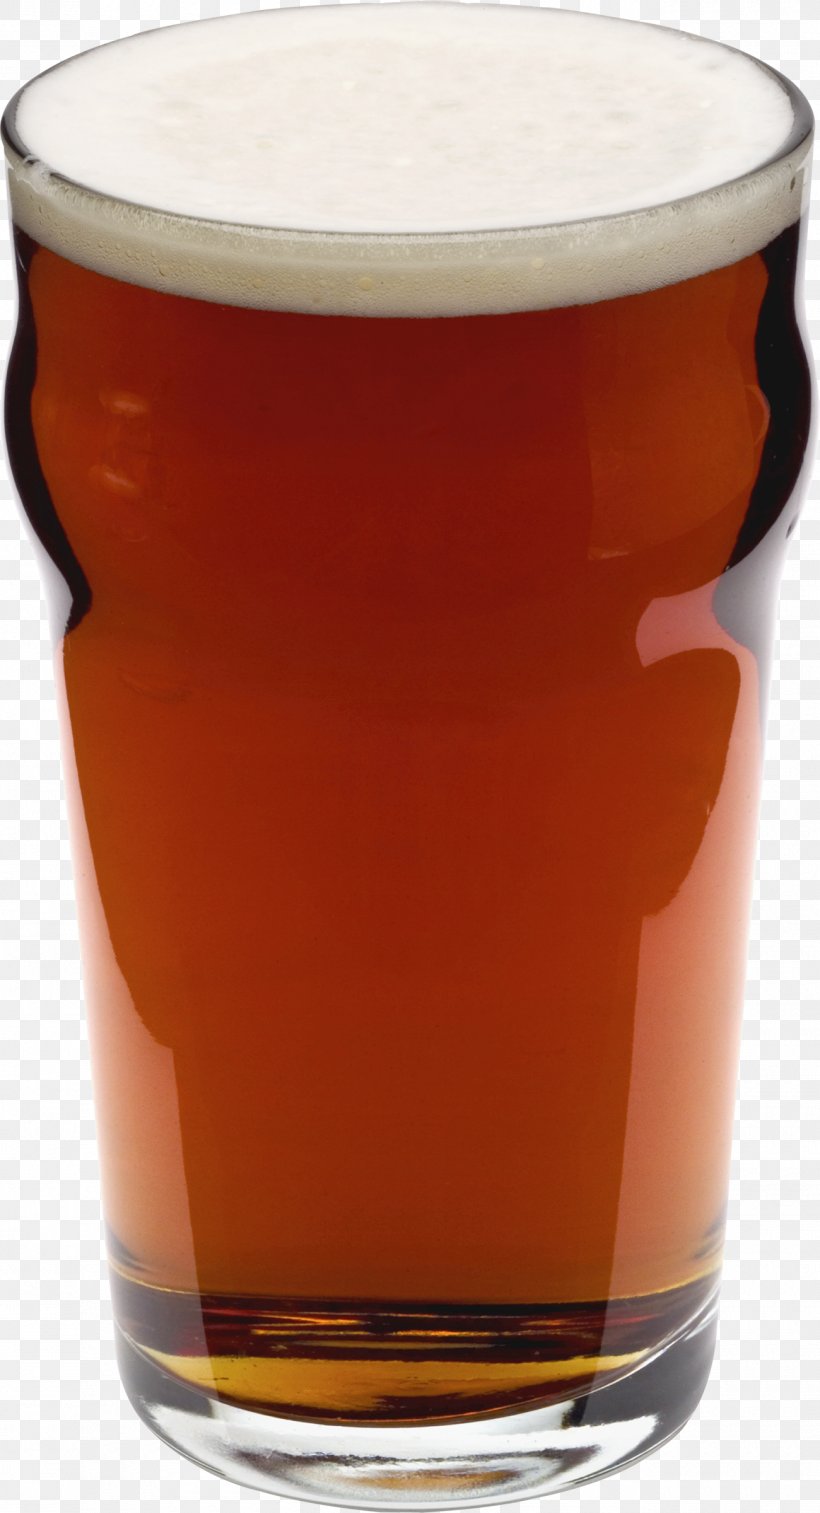 Ale Beer Cocktail Pint Glass Crayfish As Food, PNG, 1300x2400px, Ale, Beer, Beer Cocktail, Beer Glass, Crayfish As Food Download Free